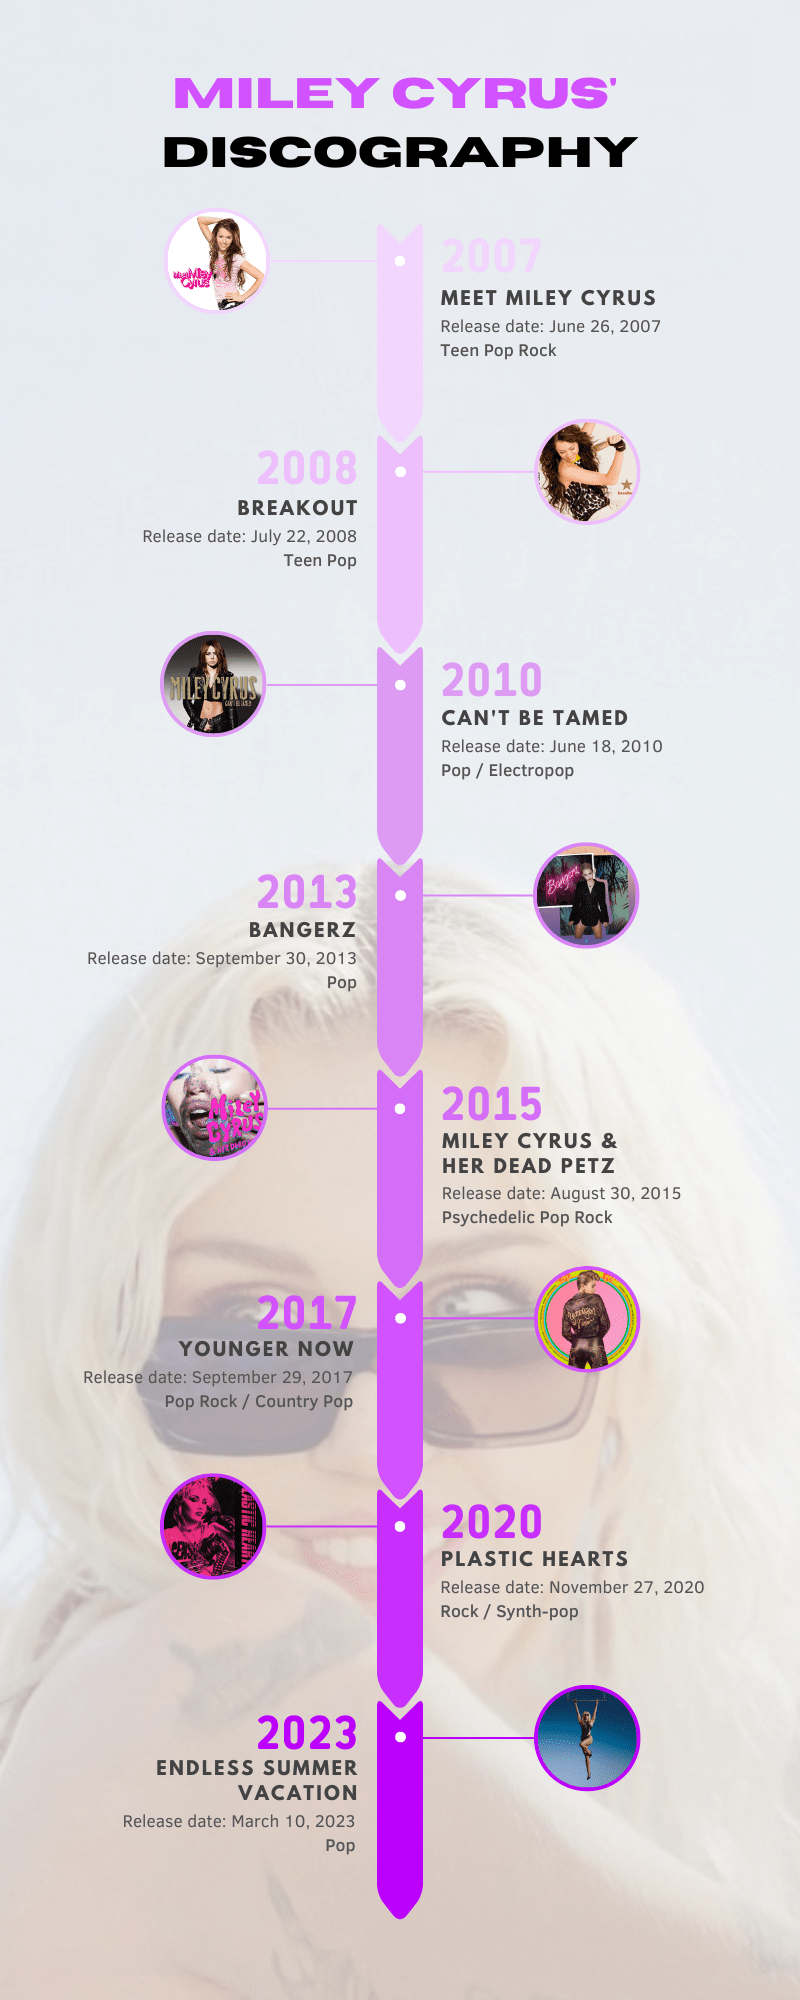 Infography of Miley Cyrus' discography